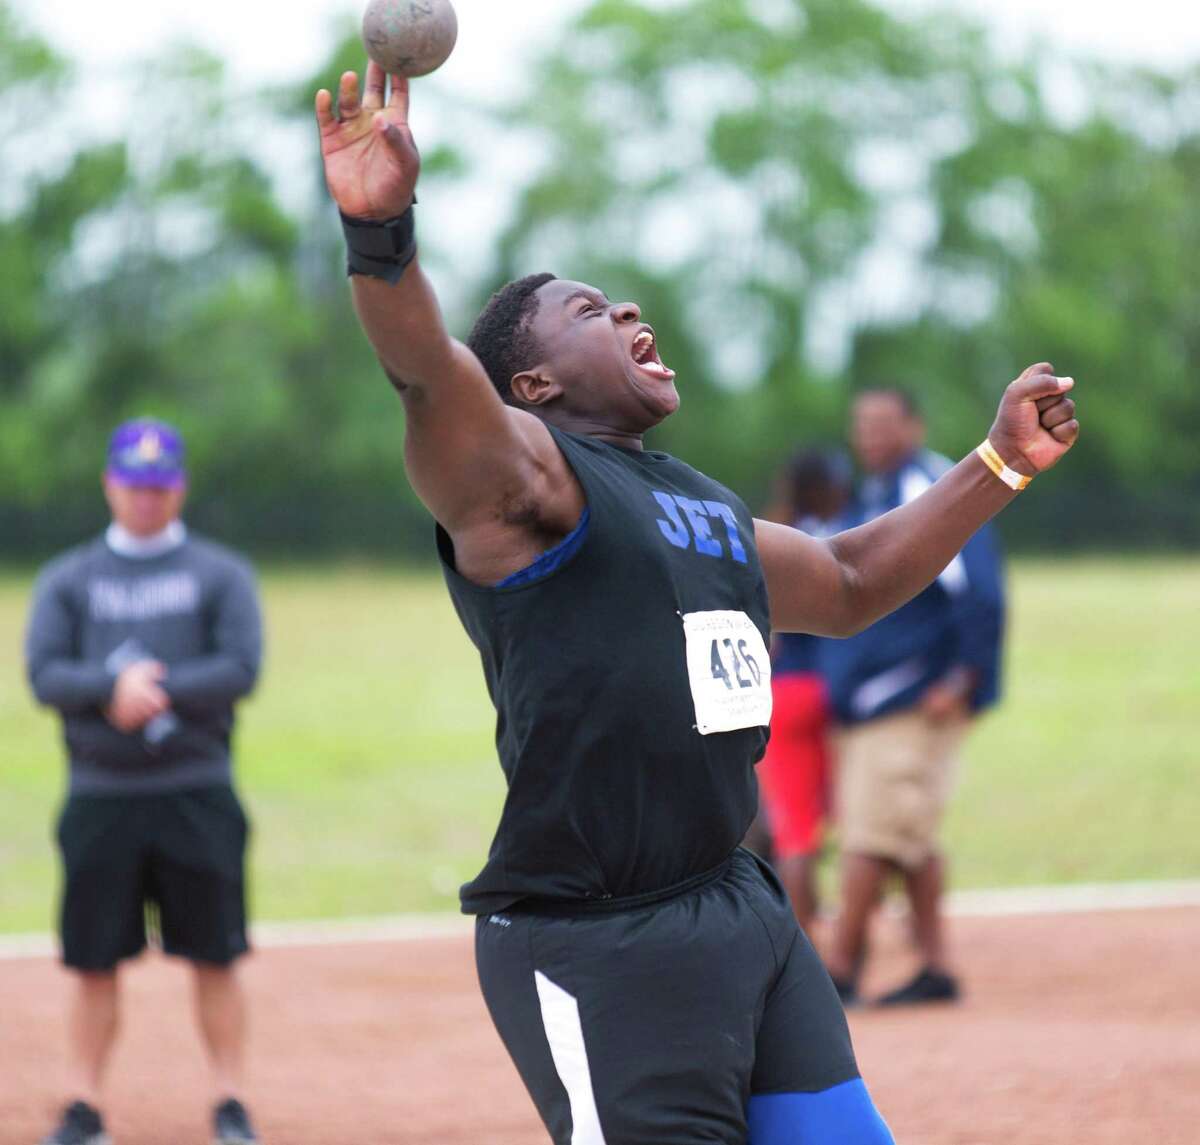 Otito Ogbonnia of Katy Taylor reacting as he is throwing the put during the shot put competition during UIL Region II 6-A Track & Field Championship at the Challenger Columbia Stadium, Friday, Apr. 29, 2016, in Houston. (Juan DeLeon / For the Houston Chronicle)